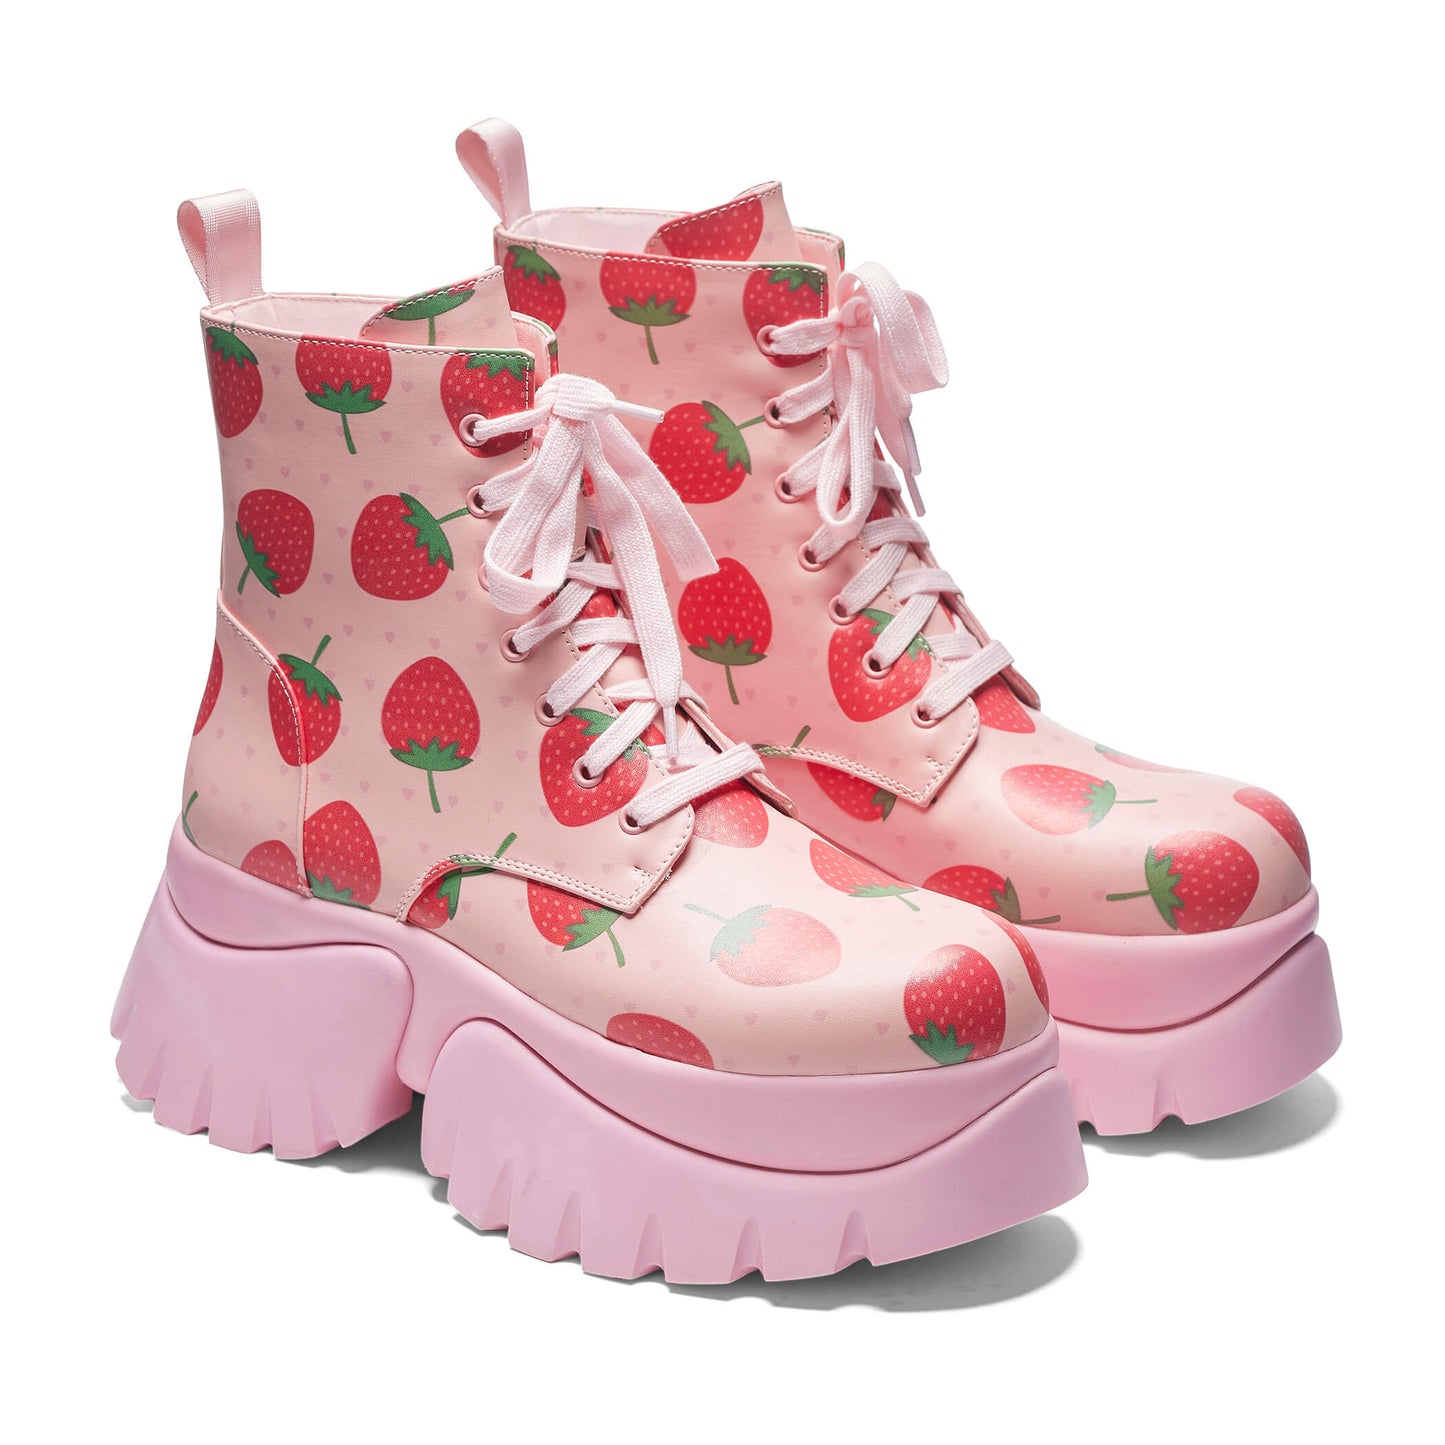 Strawberry Shortcake Pink Vilun Boots - Ankle Boots - KOI Footwear - Pink - Three-Quarter View